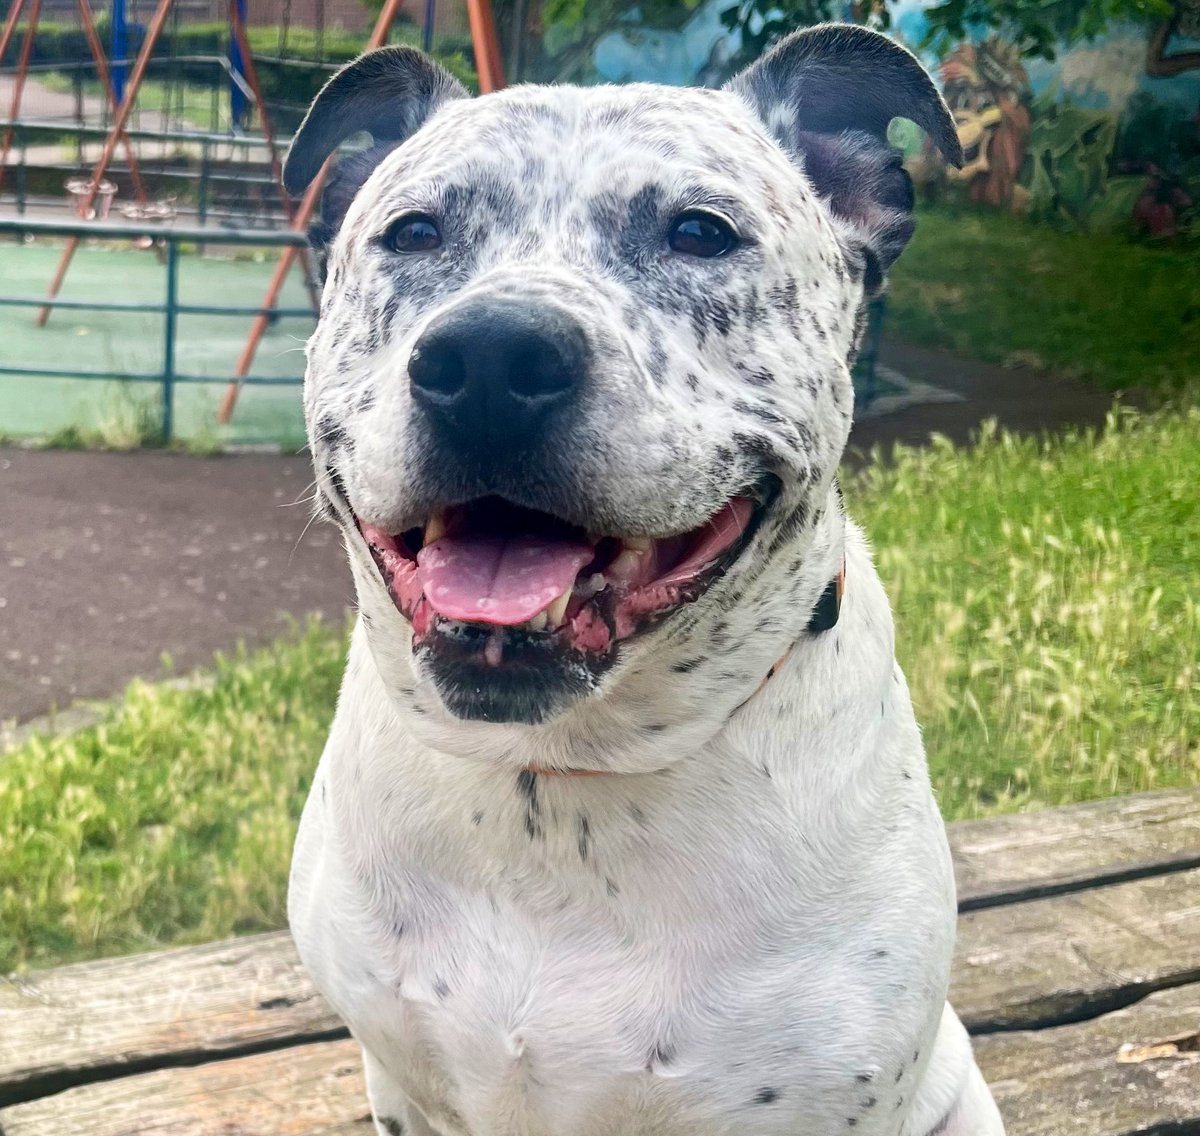 What’s a #StaffieSaturday without a #SydsSmile #dogsoftwitter #StaffieSmiles